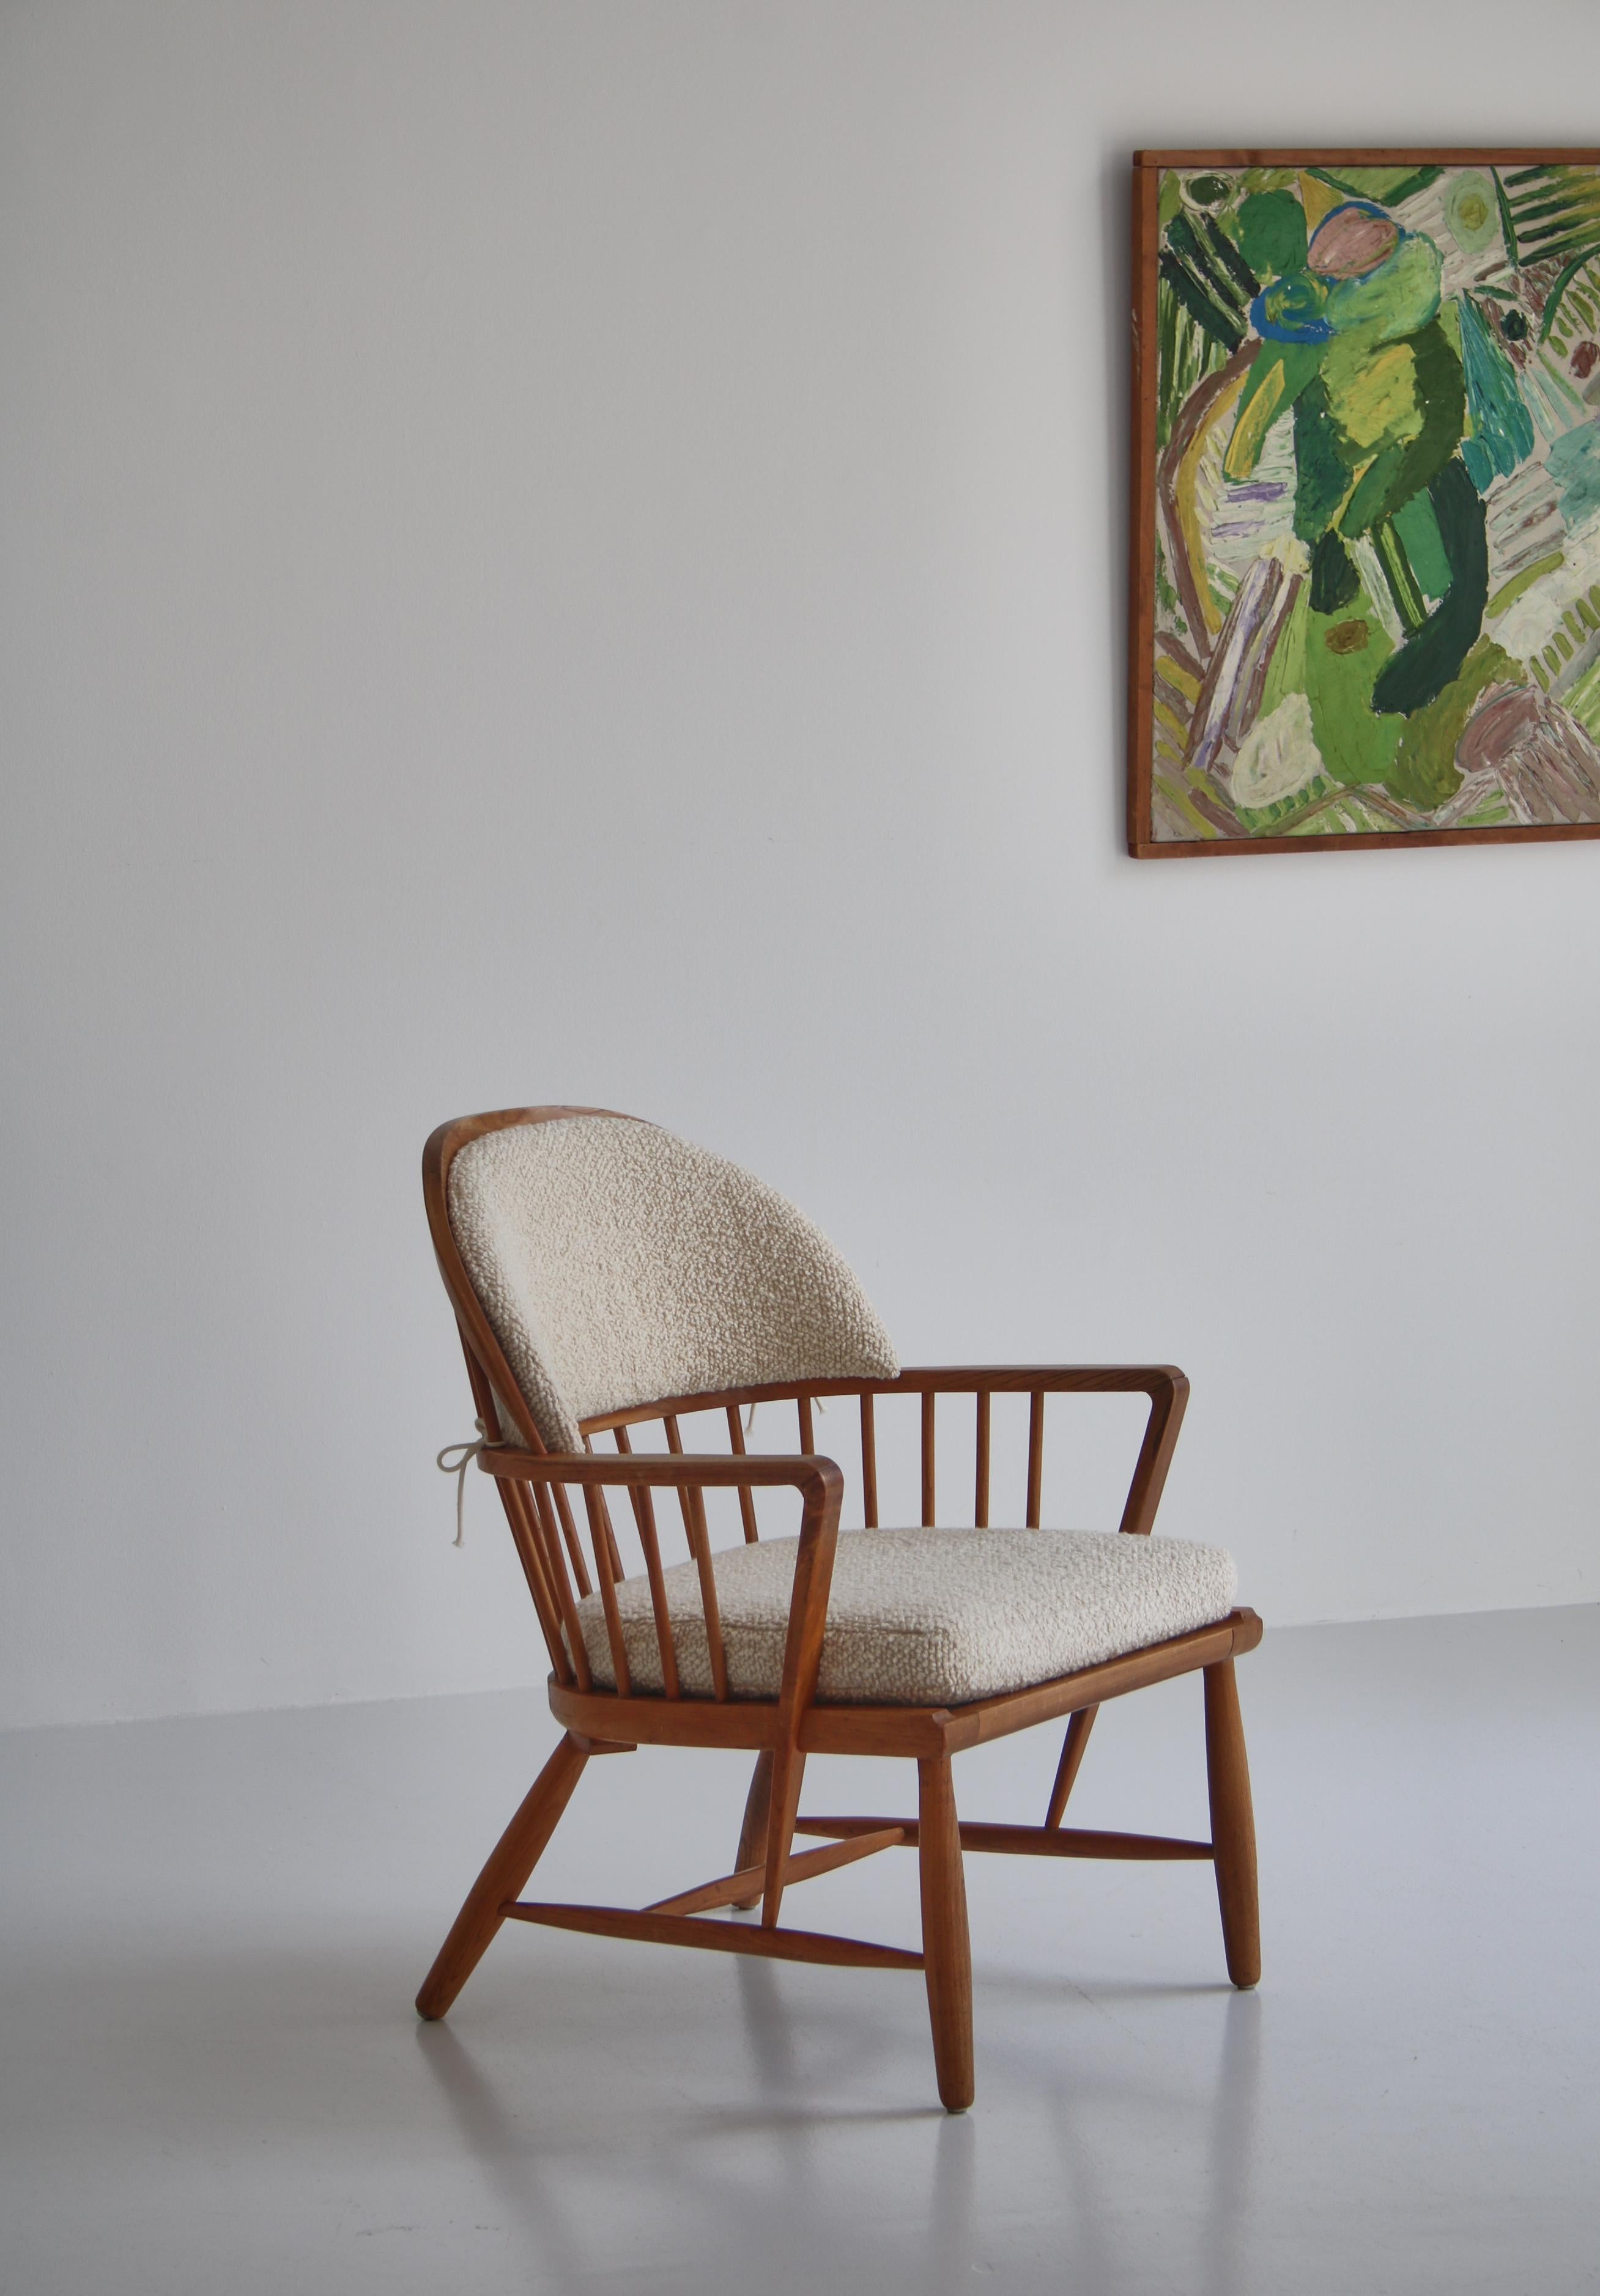 Windsor armchair by Danish cabinetmaker made in the 1940s. The chair is made from solid ash and is sublimely built with many wonderful details showing great craftsmanship. The original cushions have been reupholstered in chunky white boucle from